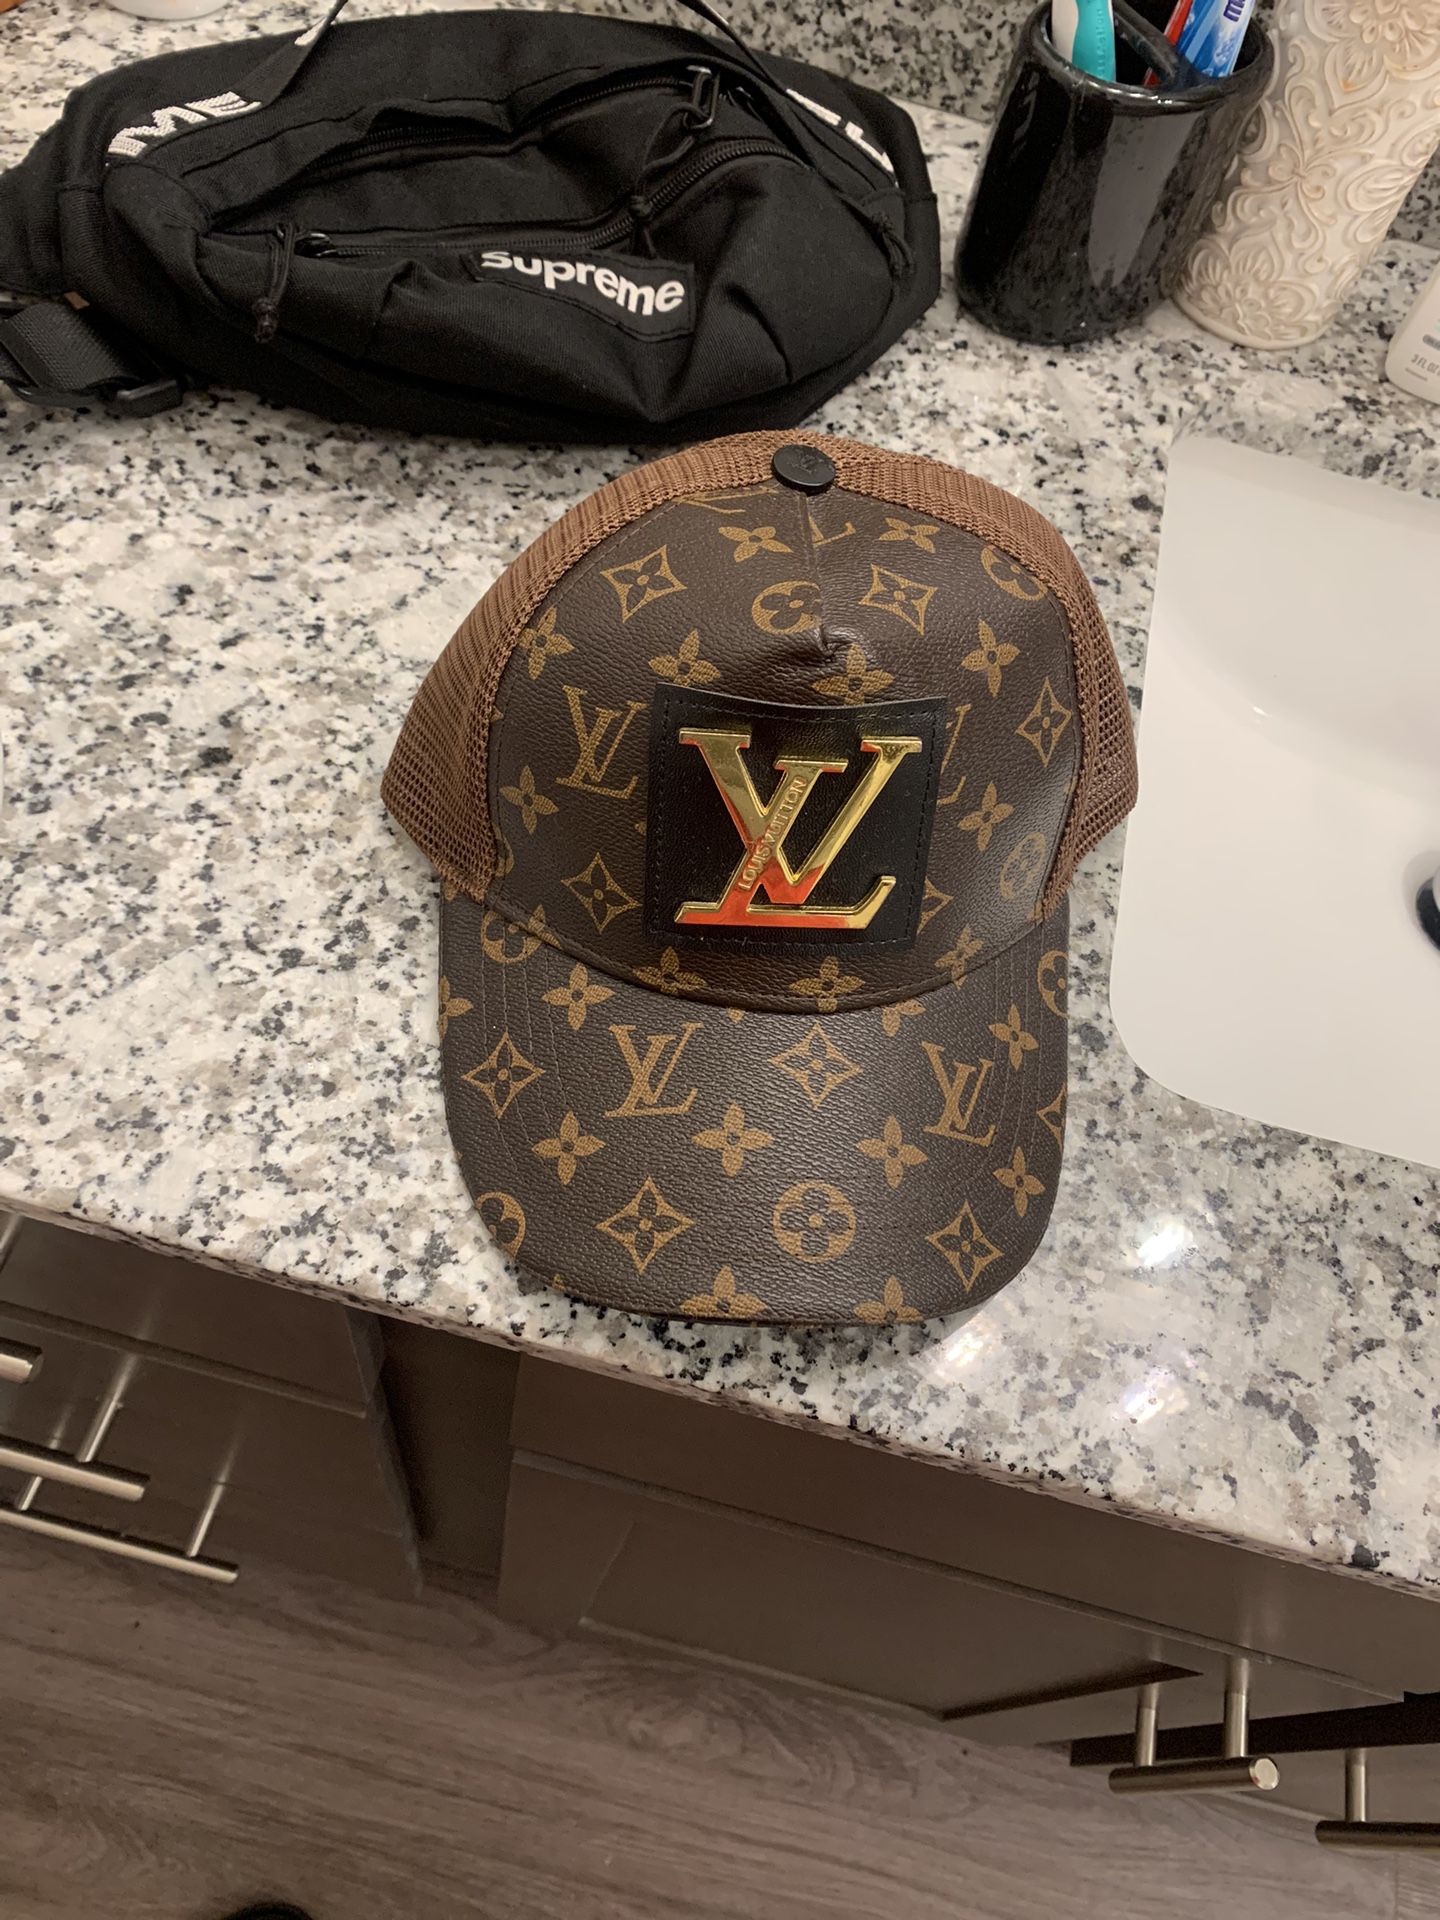 LV Baseball Hats for Sale in New York, NY - OfferUp  Louis vuitton cap, Louis  vuitton hat, Louis vuitton